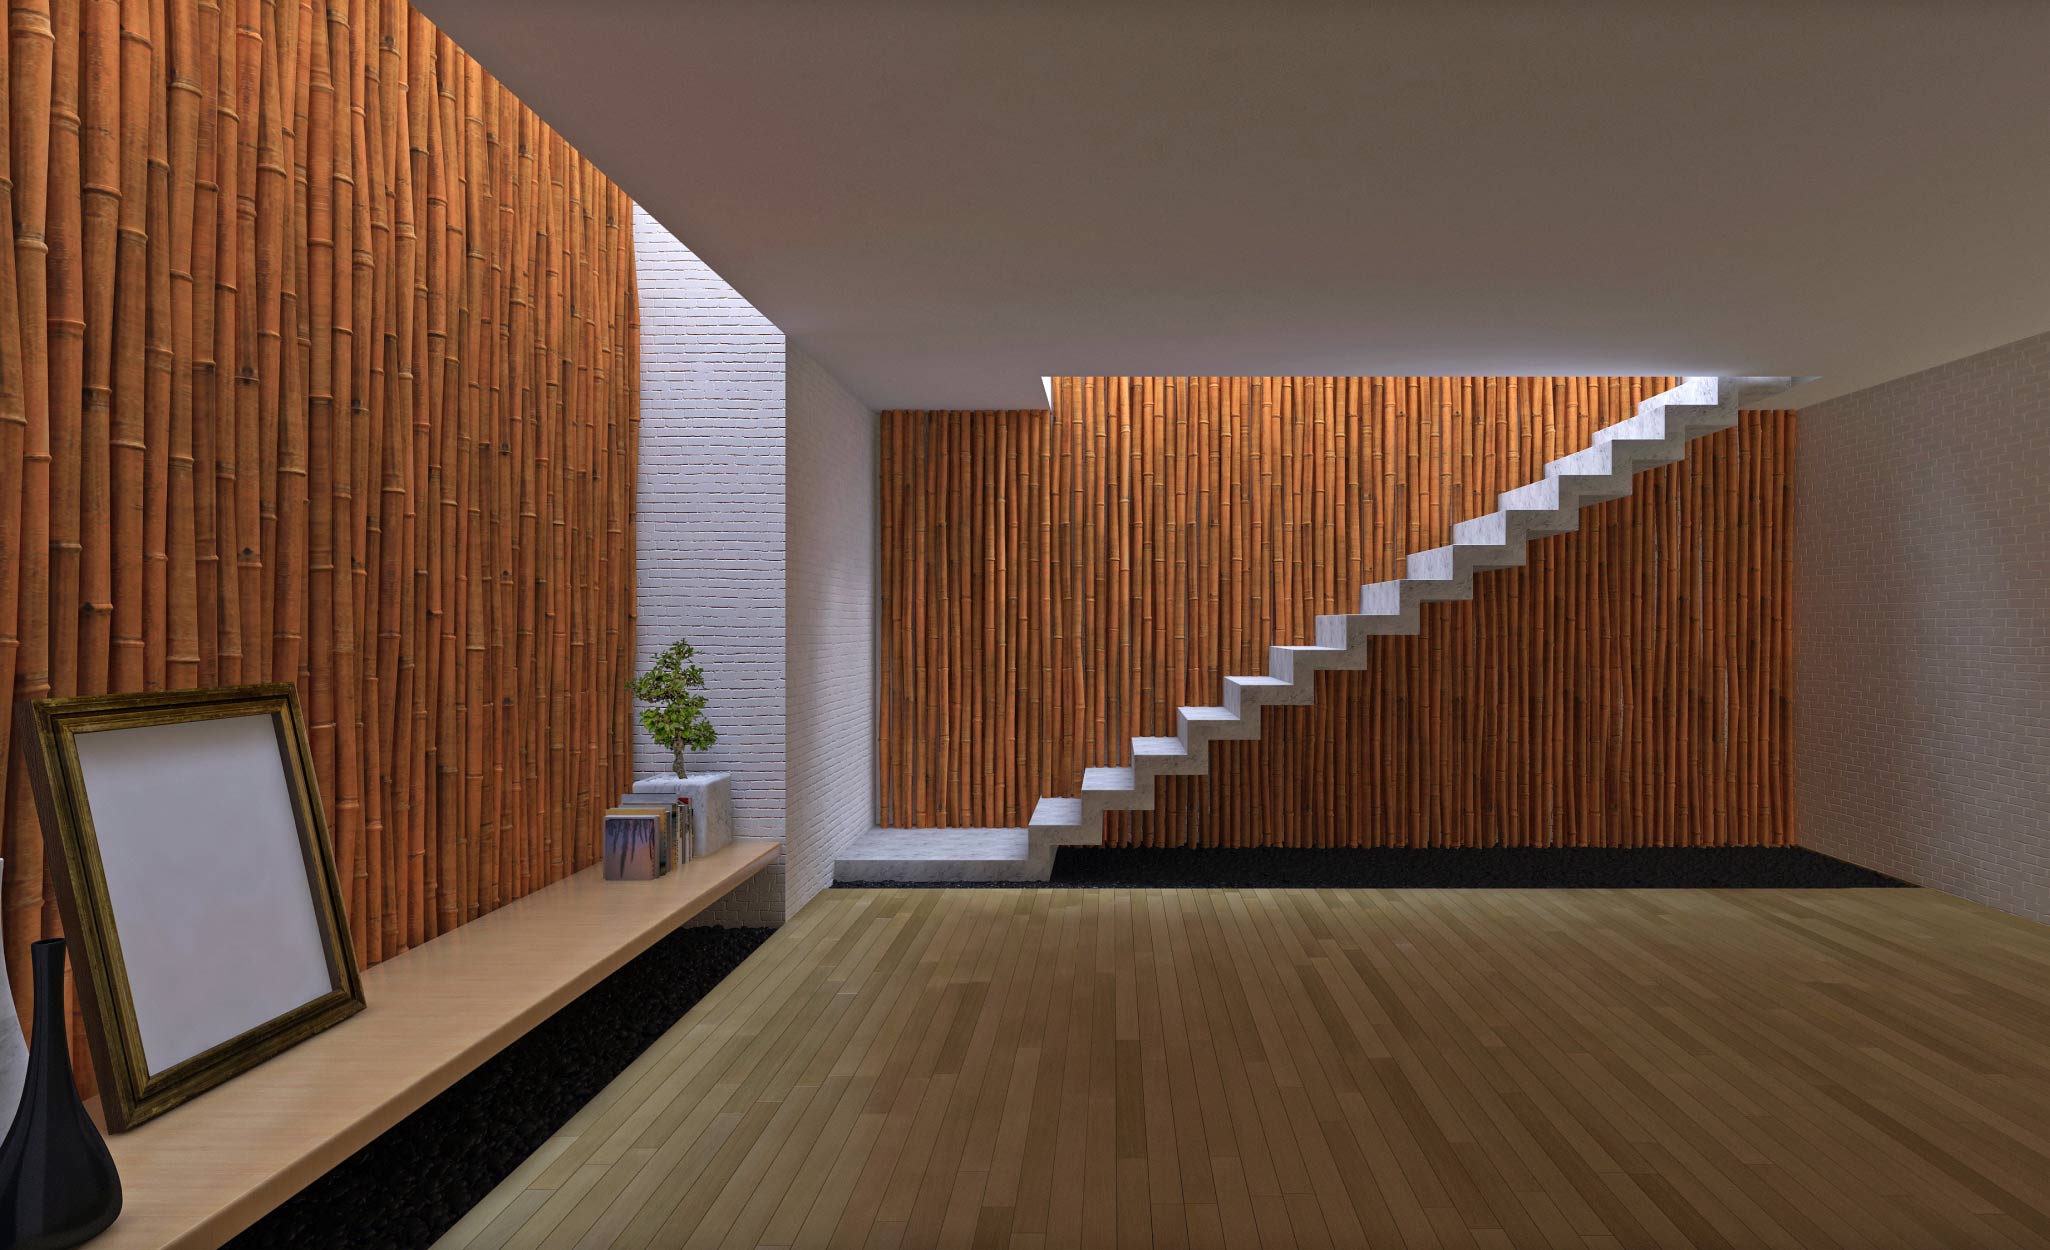 Bamboo walls decorate a room.